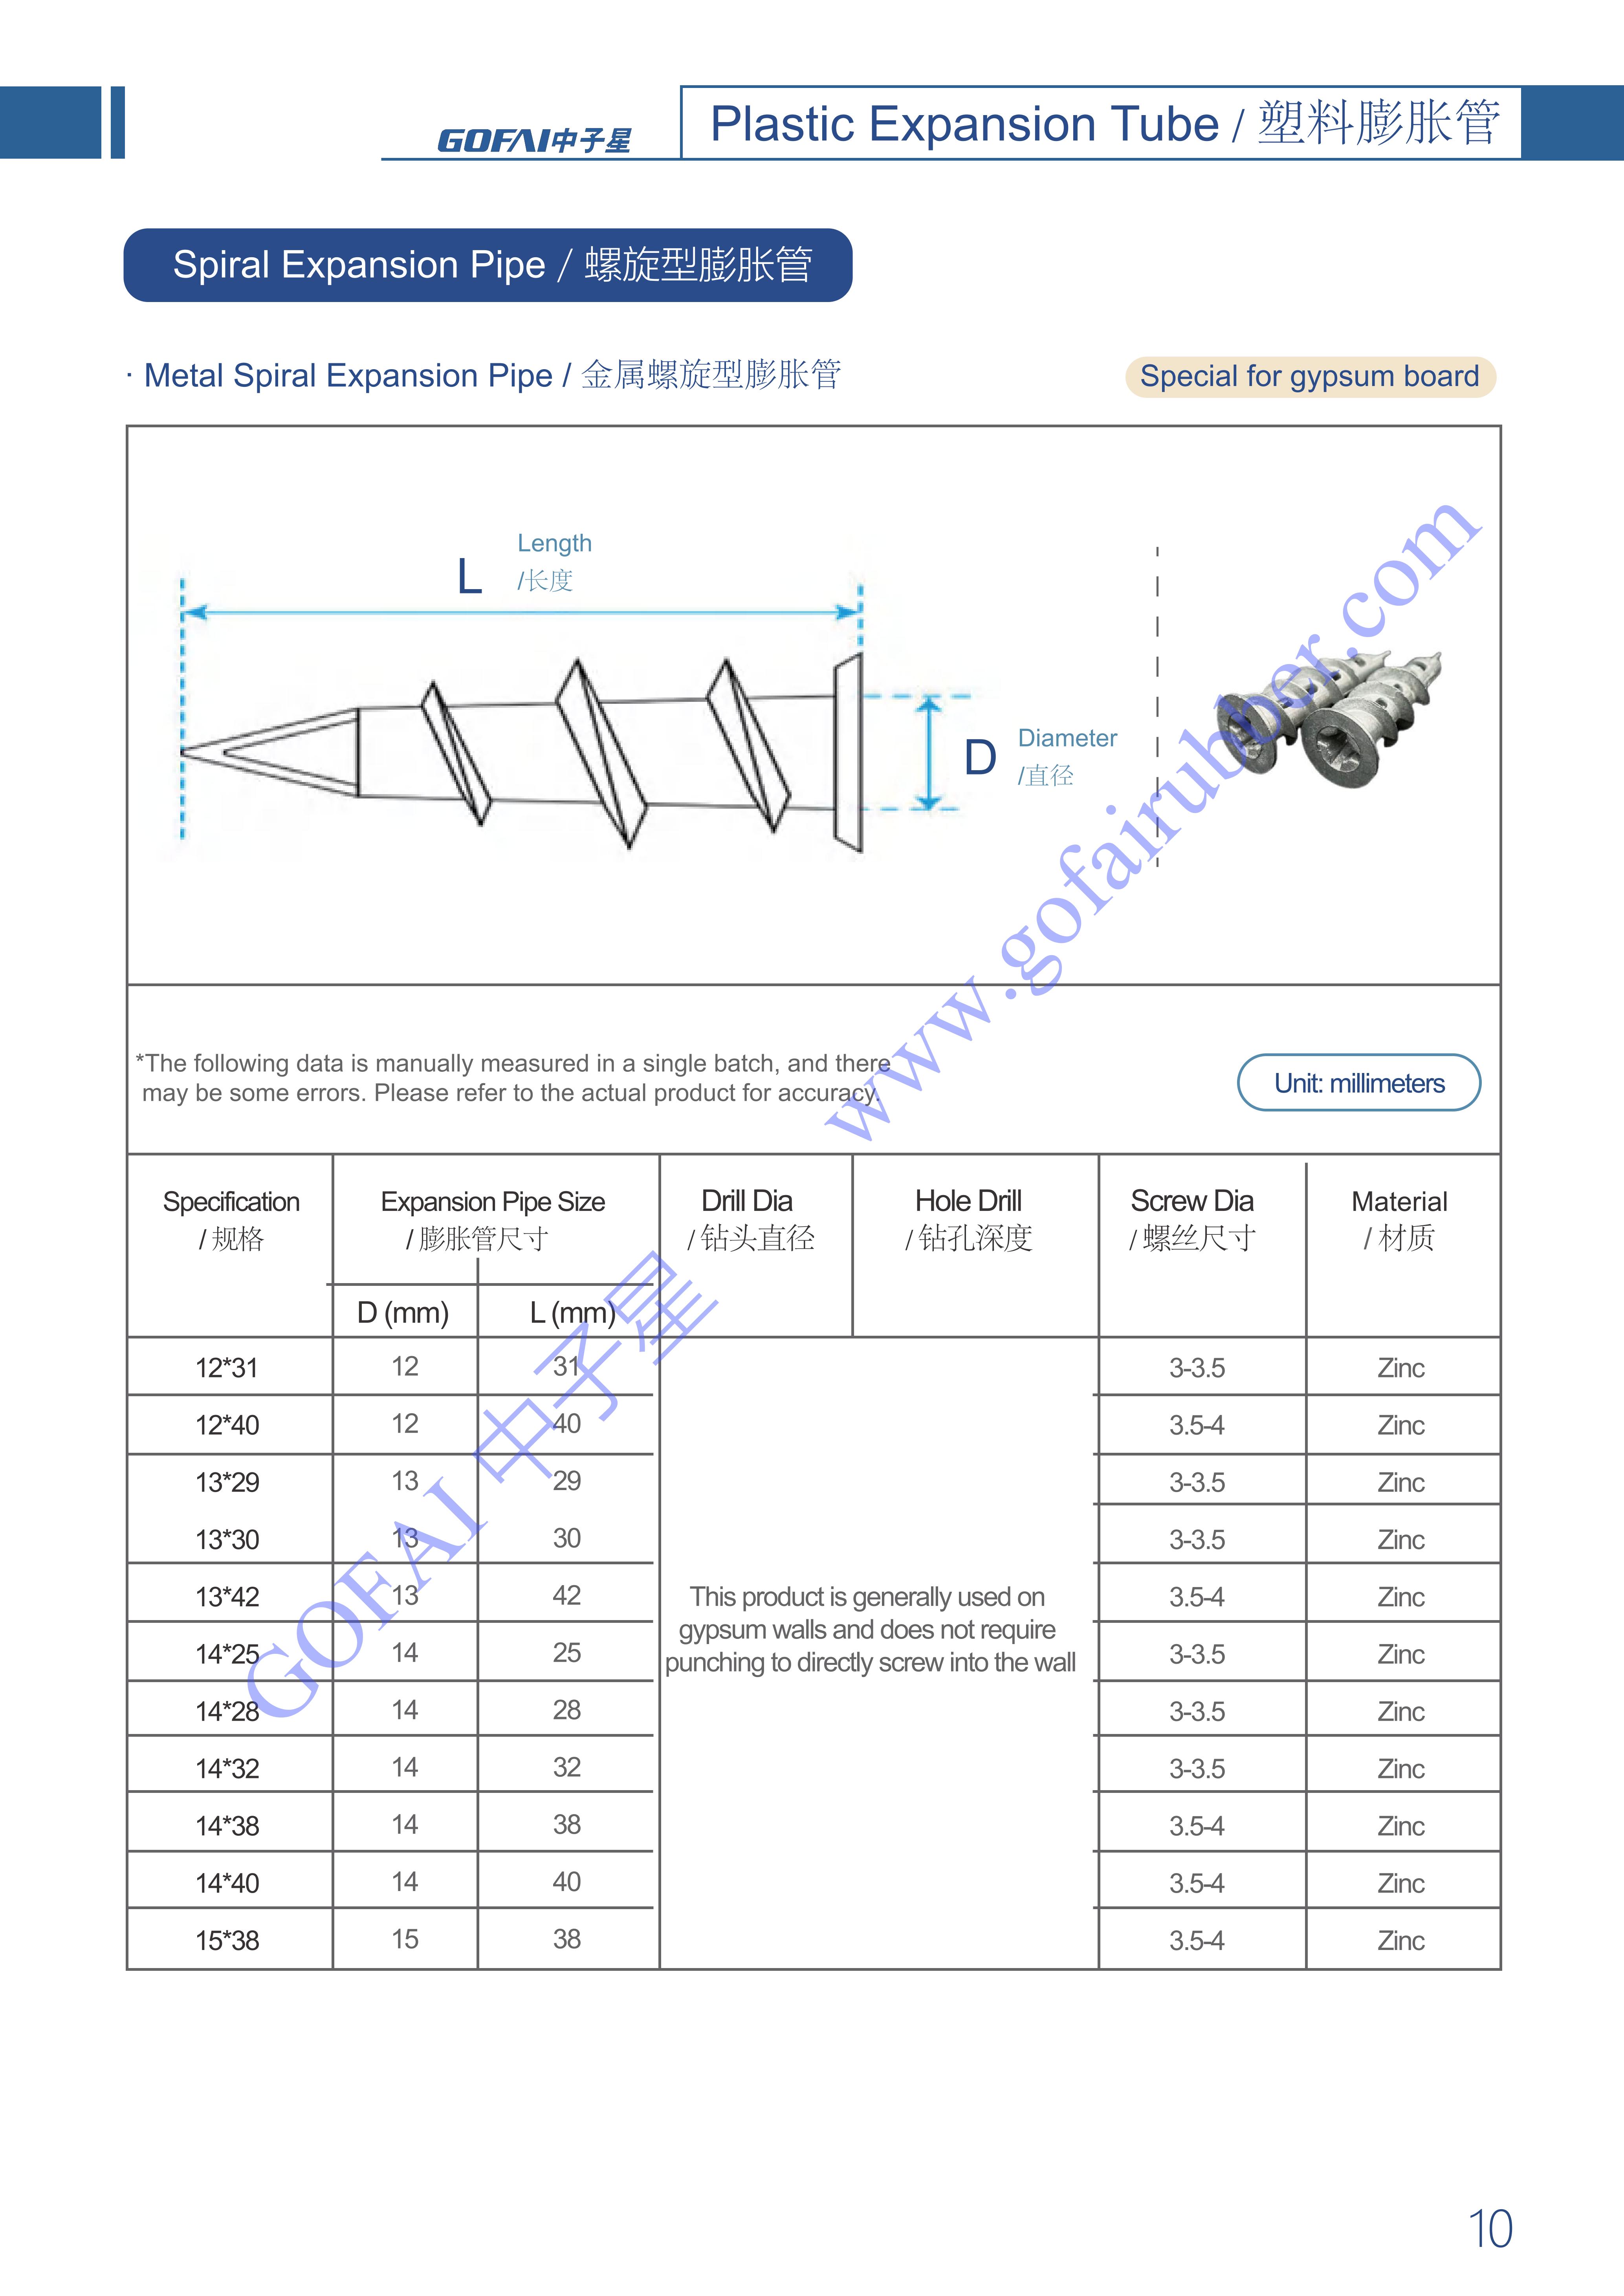 GOFAI Plastic Expansion Tube Series Products Brochure_11.jpg